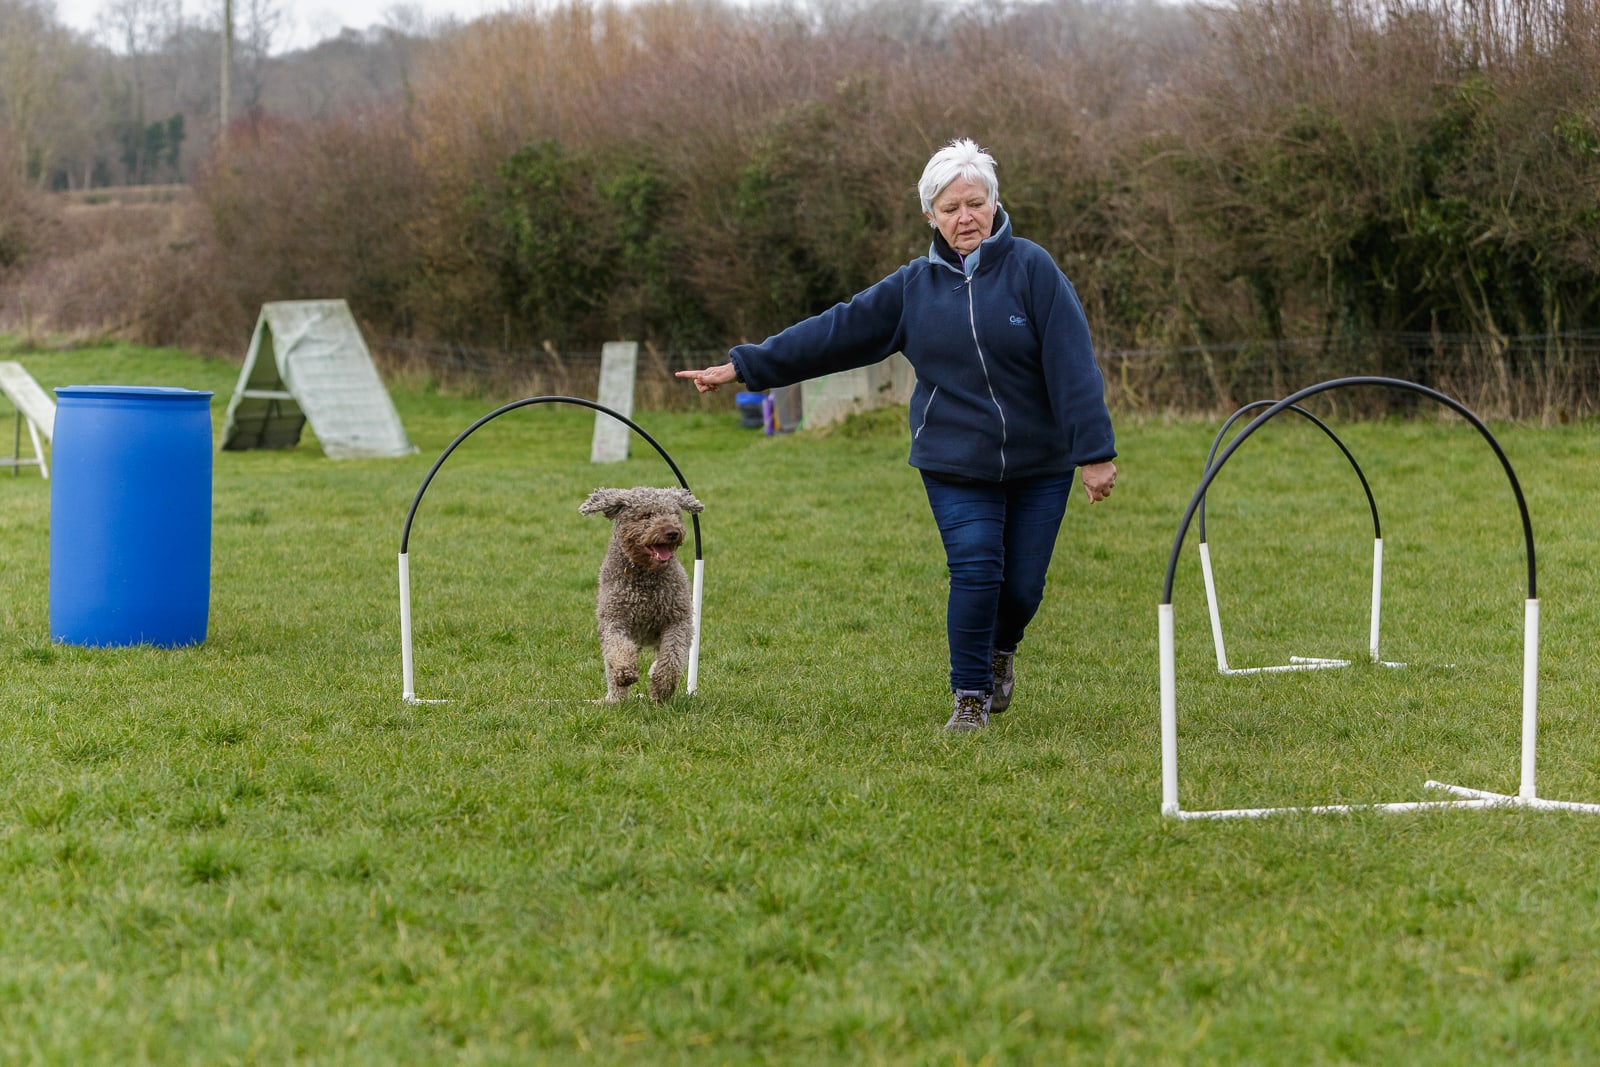 A Lagotto Romagnolo dog with owner in a hoopers class